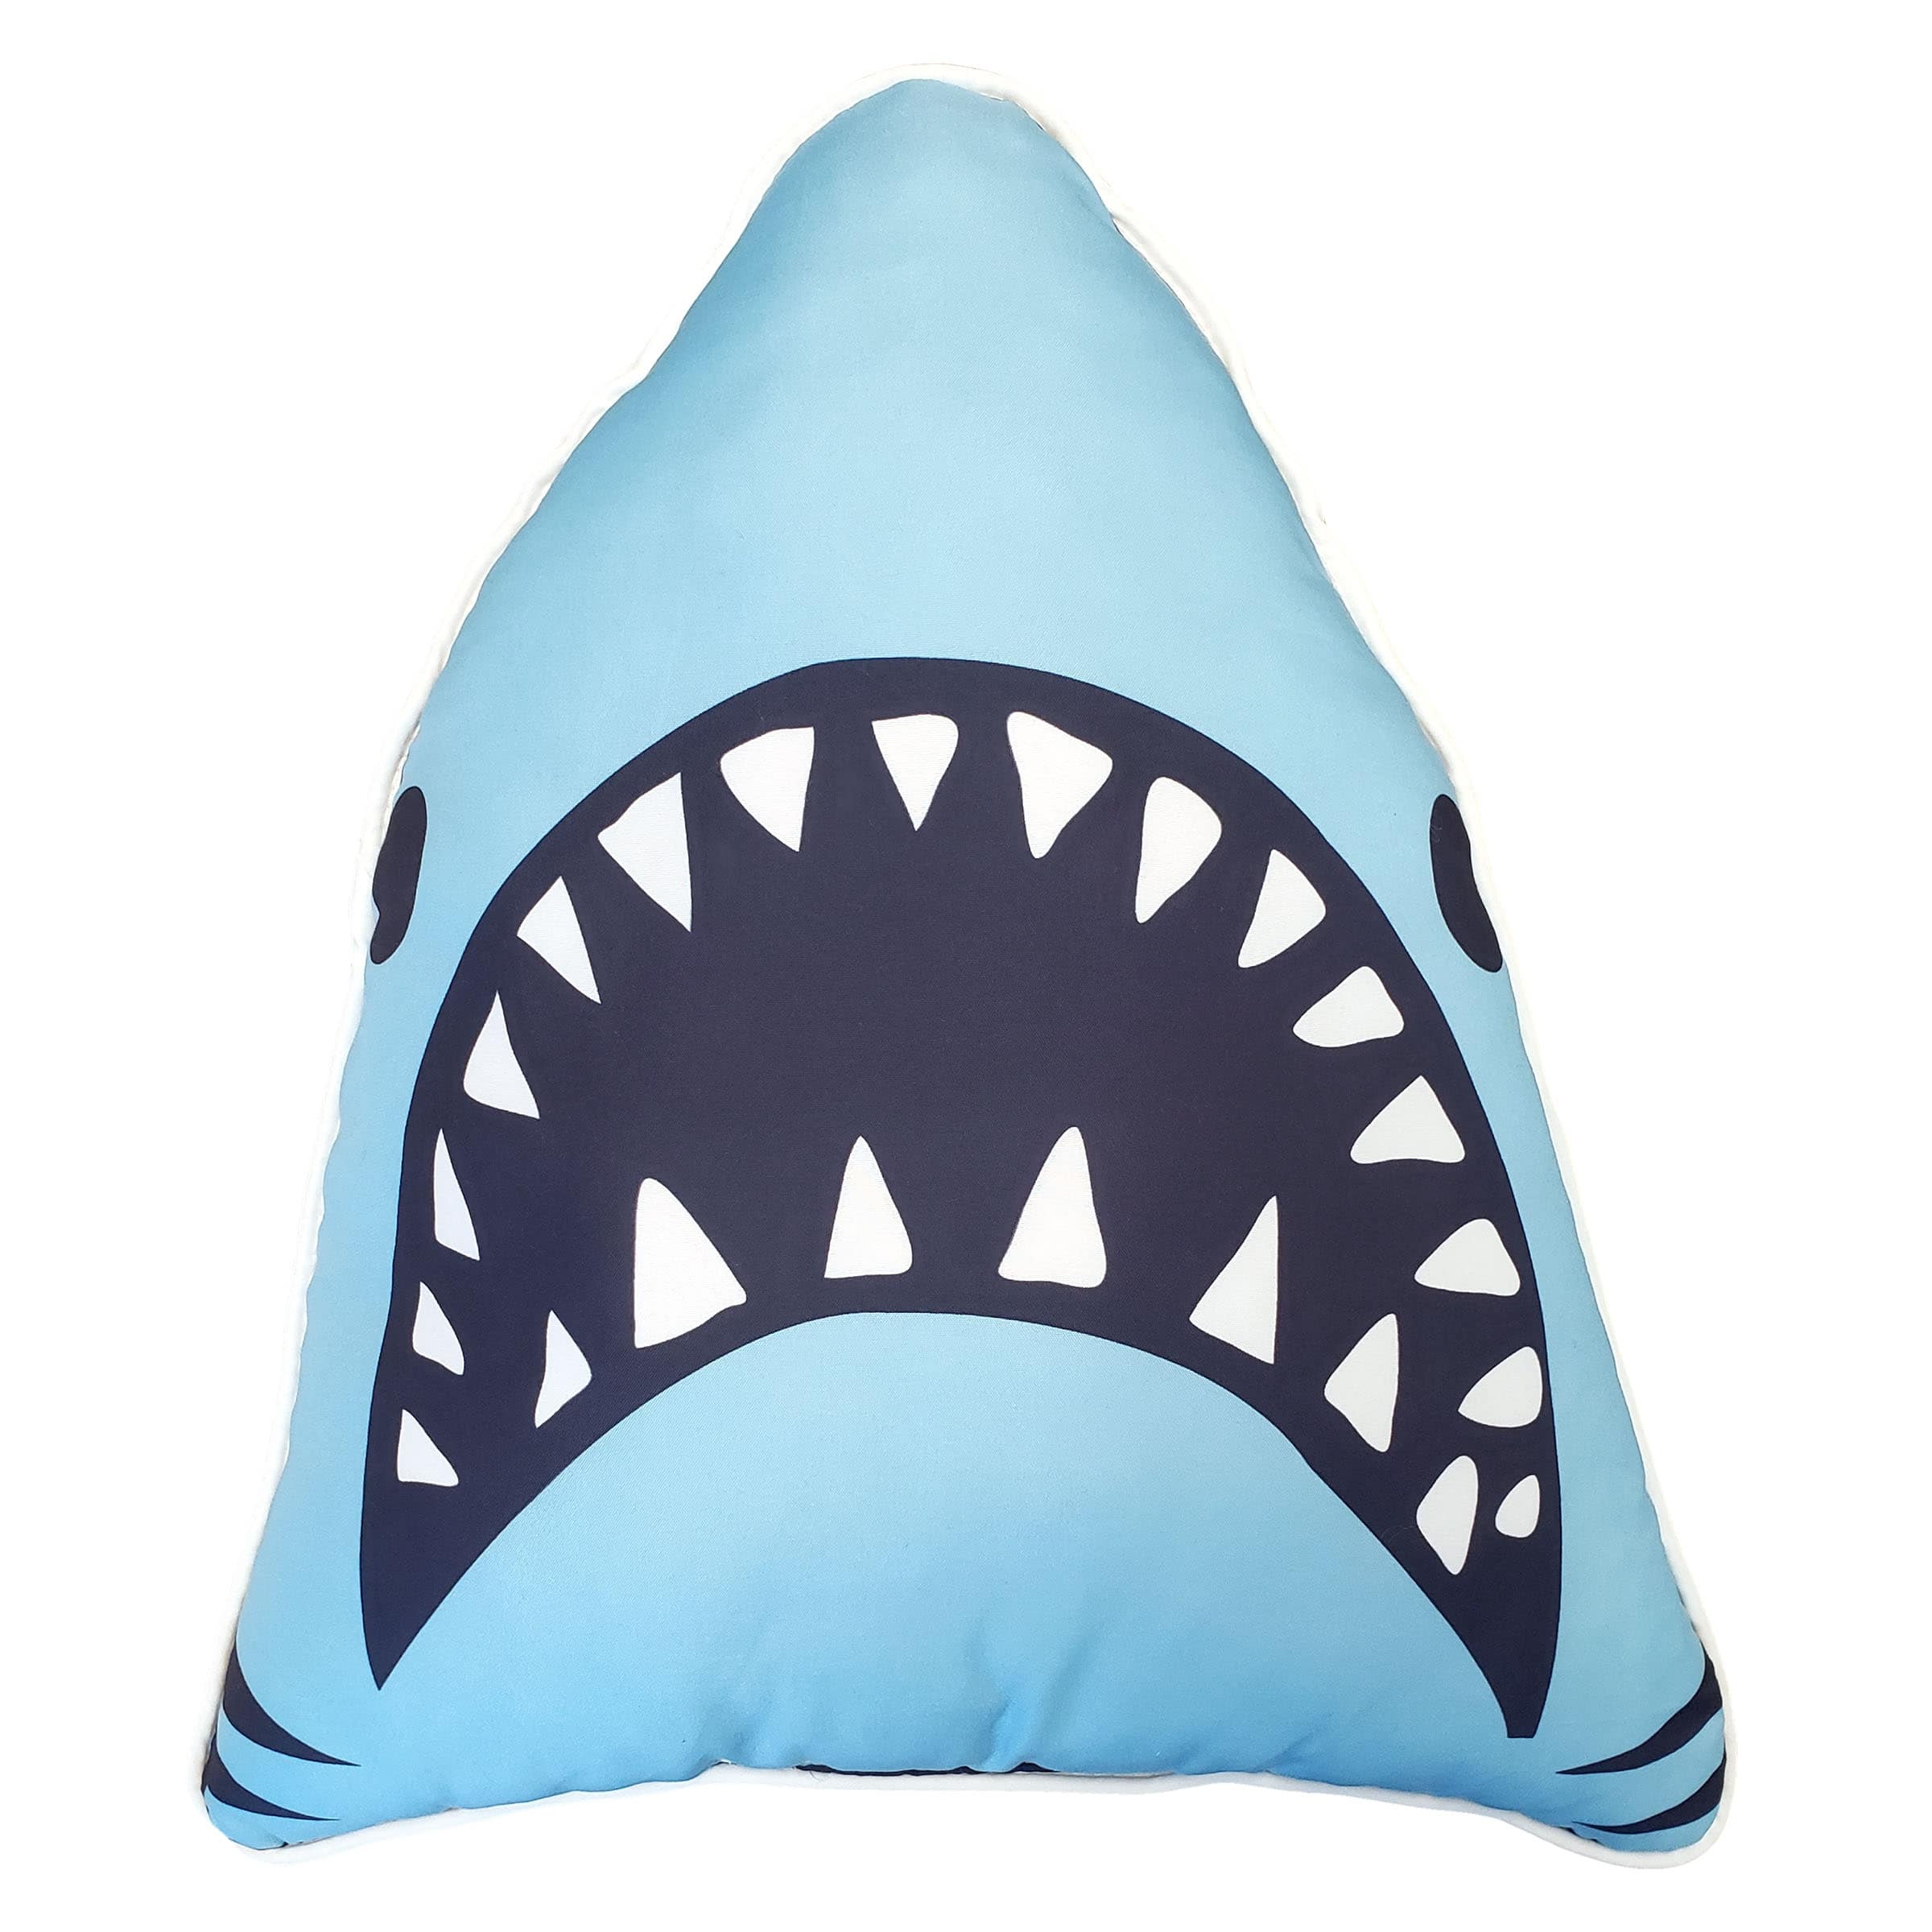 ENT 883 NW Kids Shark Adventure Full Bed-in-a-Bag with Decorative ...